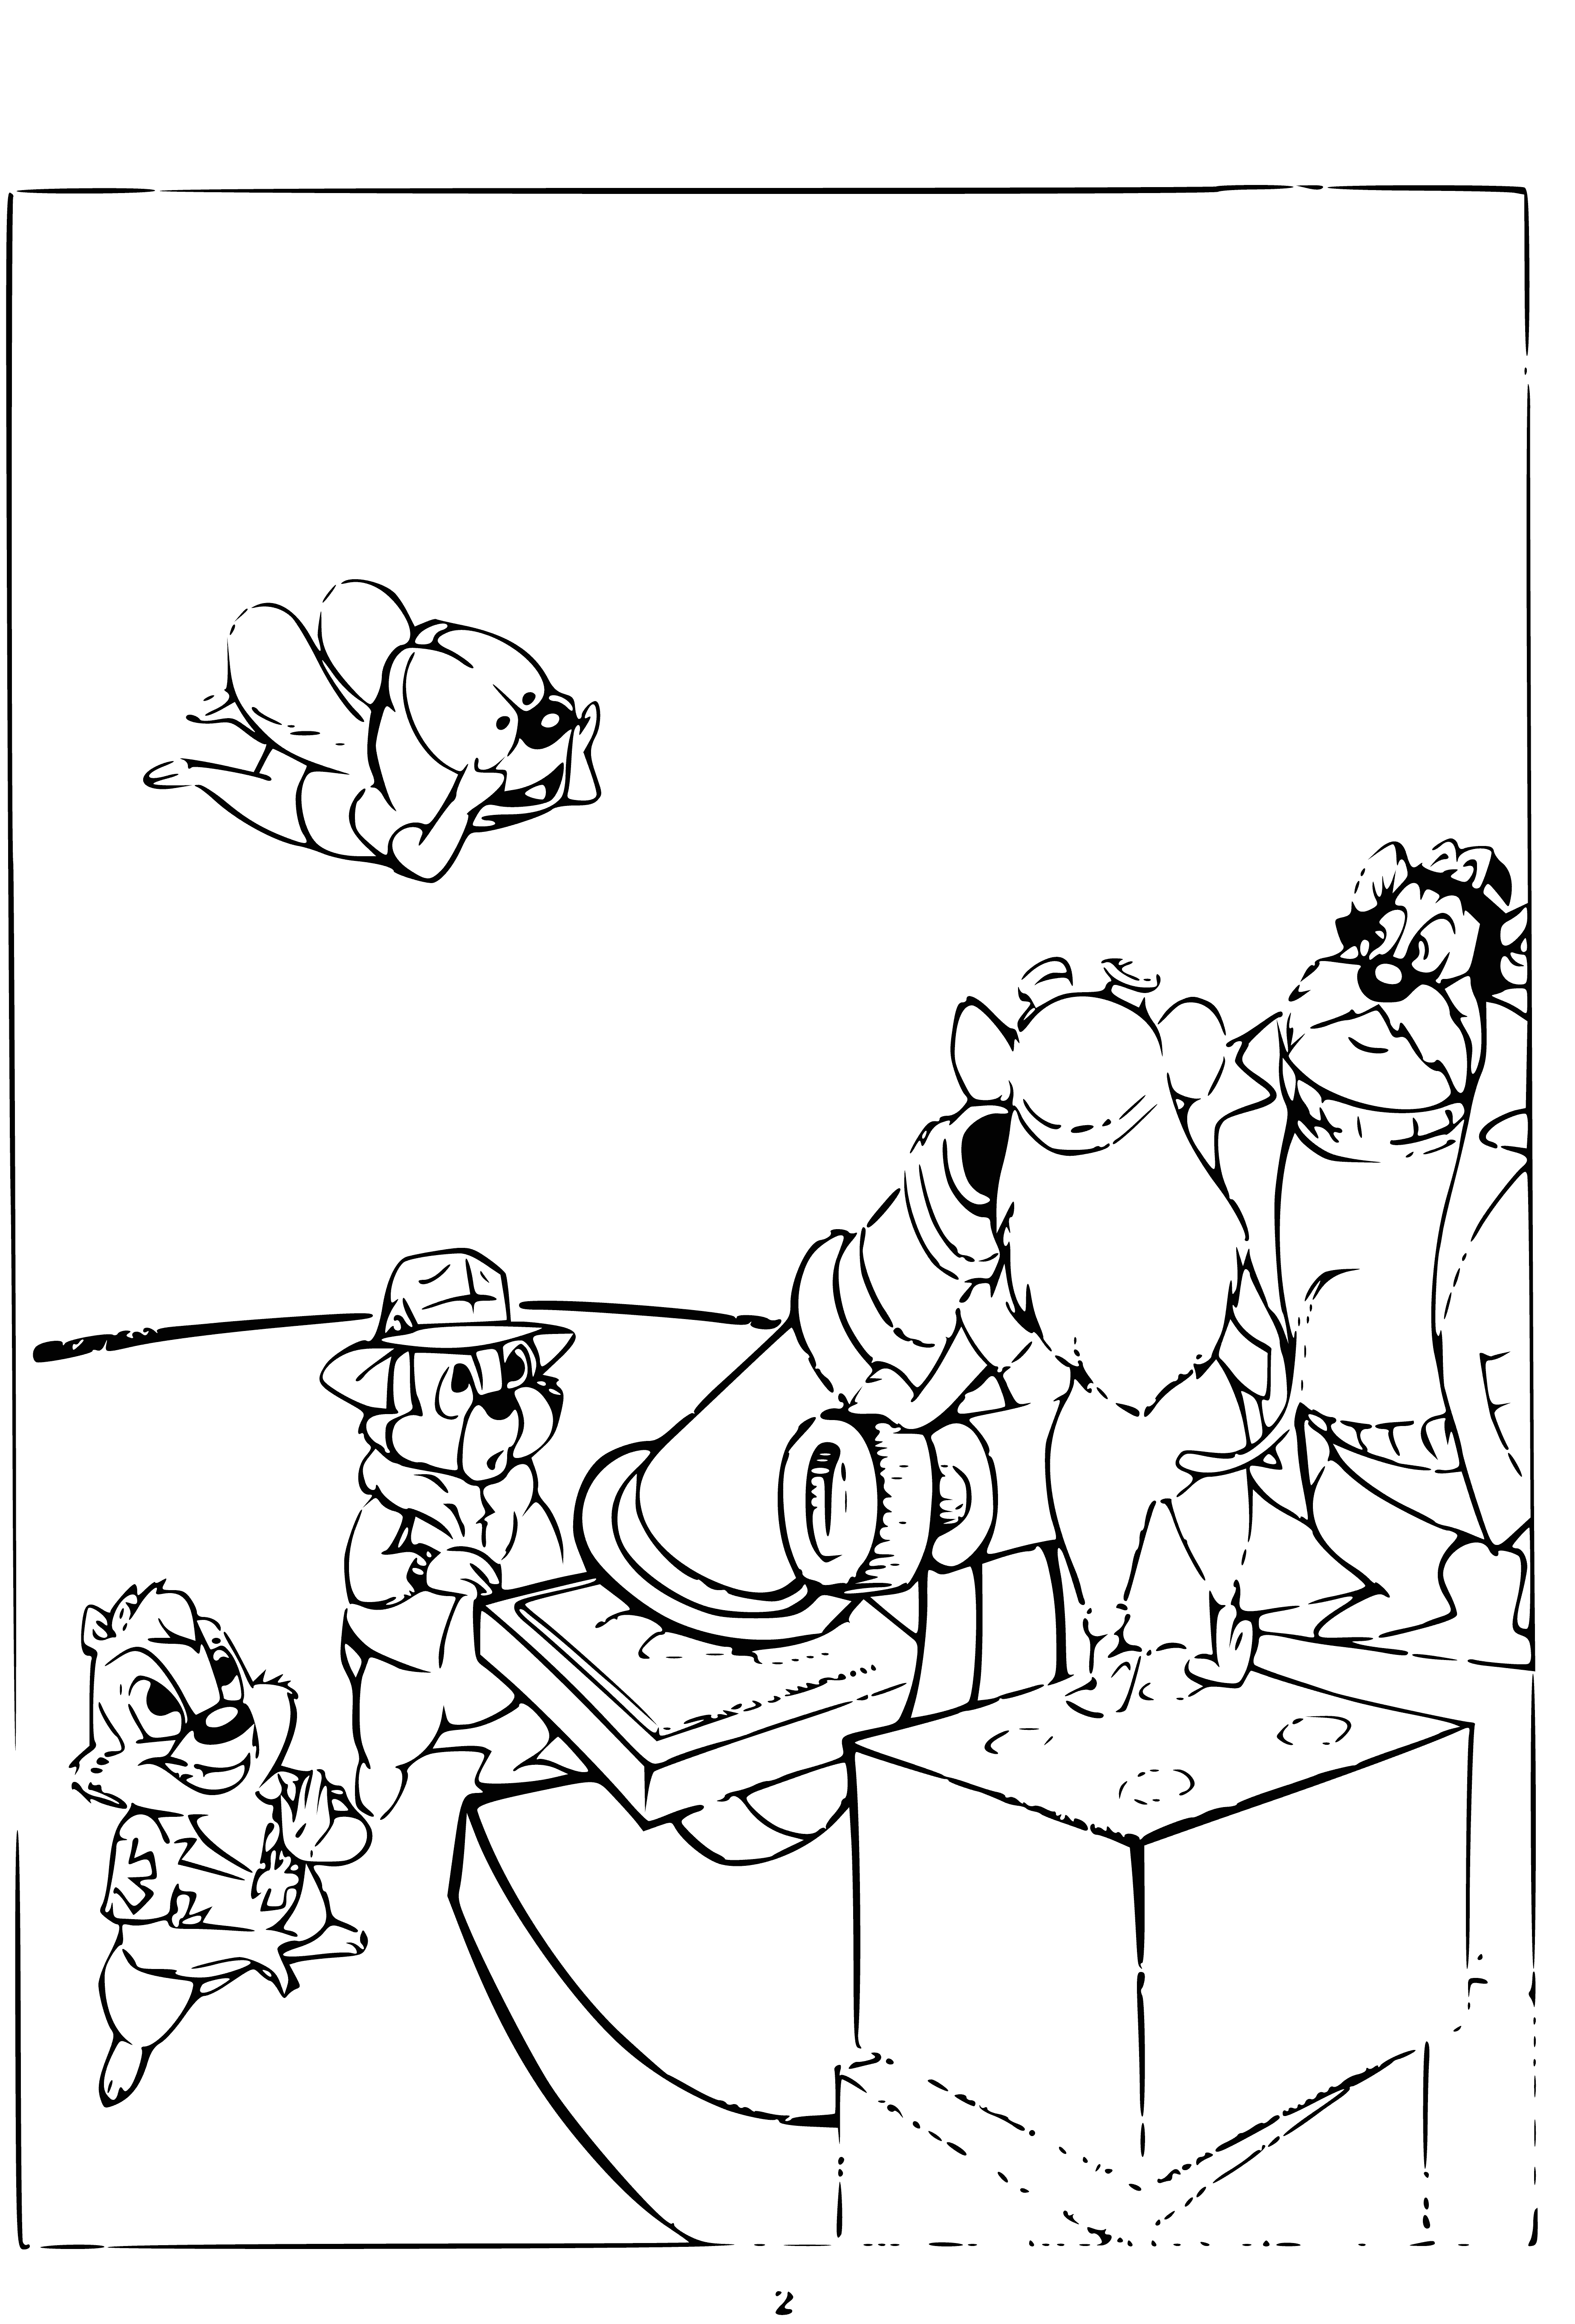 coloring page: Team gathers around microscope, faces intense and serious, looking at some unknown.